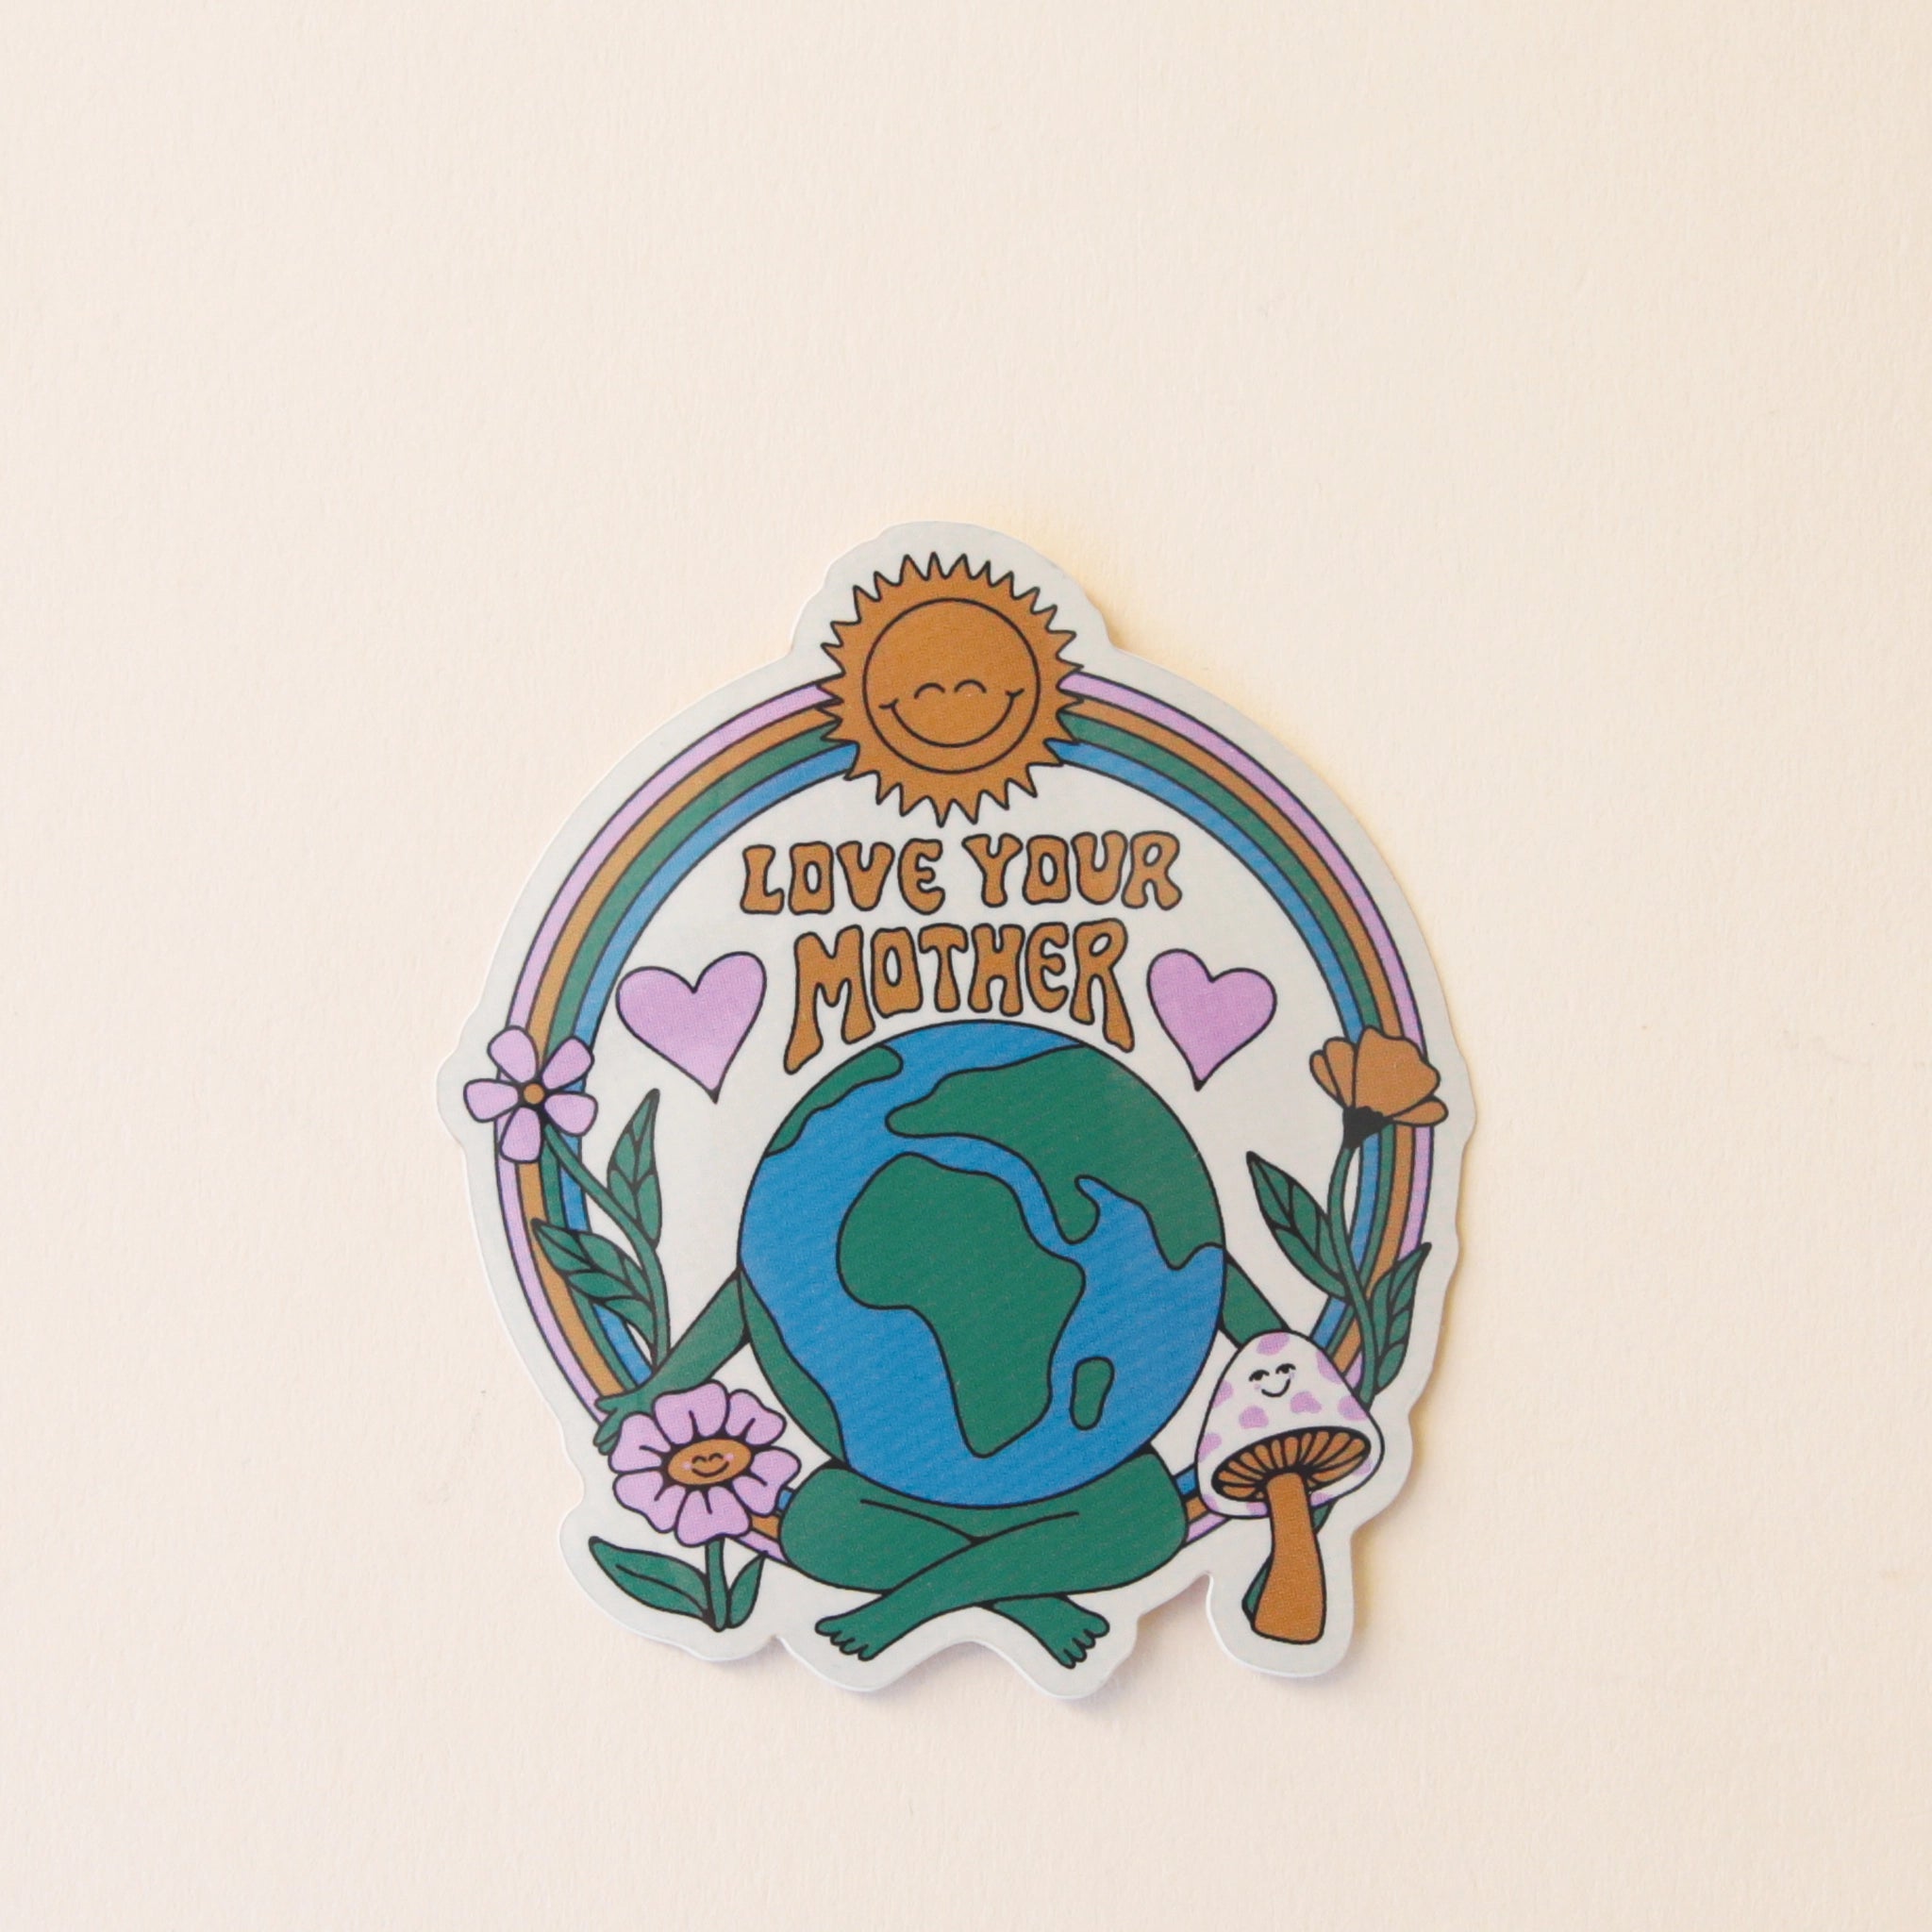 A round vinyl sticker with the planet earth in the center with green legs and arms along with a rainbow above it and a smiling sun in the center of that. Next to the earth is daisy, heart and mushroom graphics.